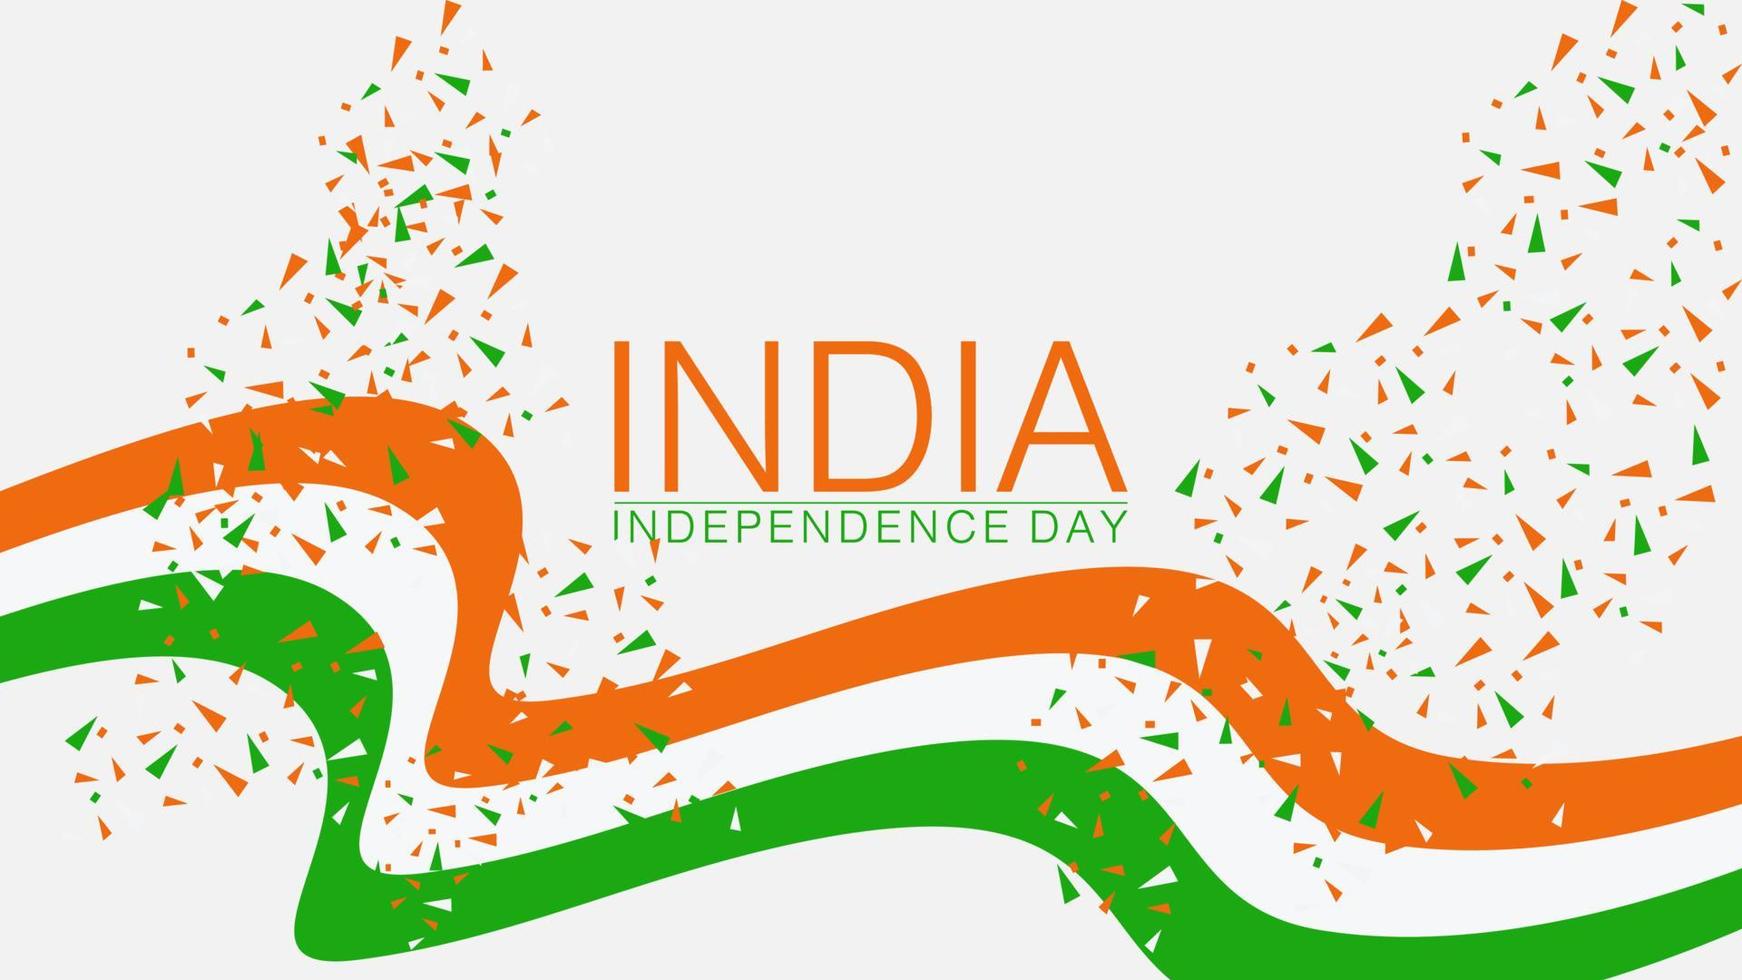 indian independence day banner illustration, 15 august Horizontal leaflet of India's national holiday. Celebration poster in flag colors vector